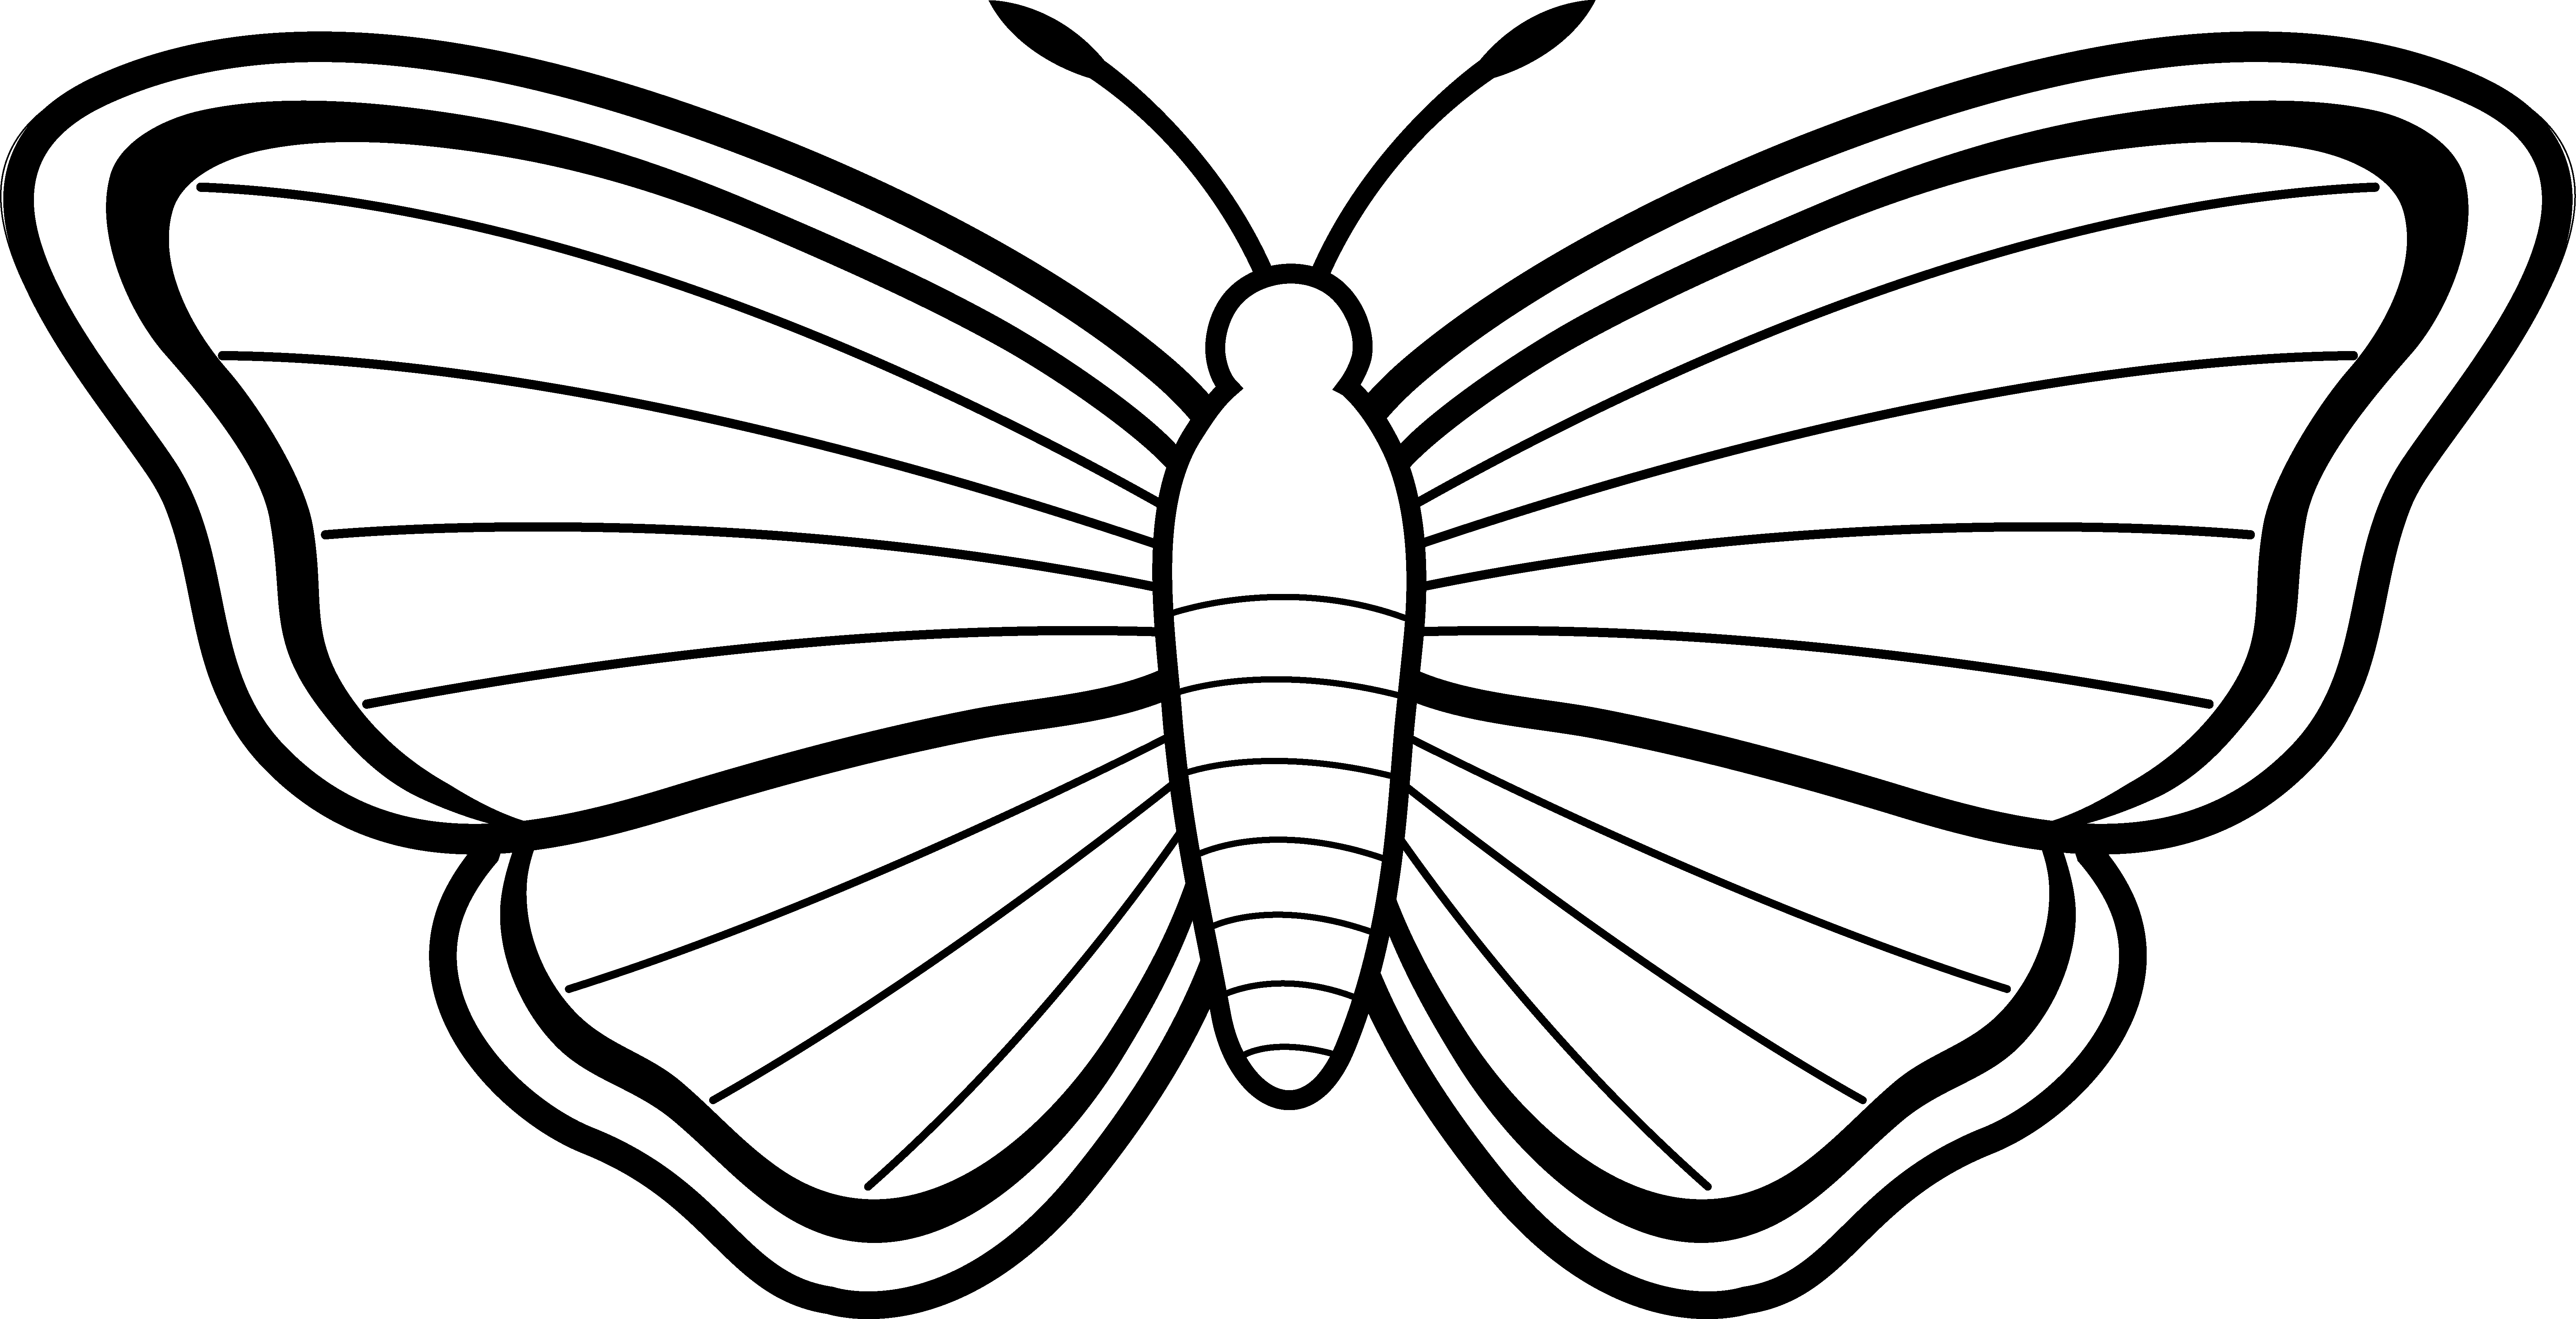 Black and white comical butterfly clipart